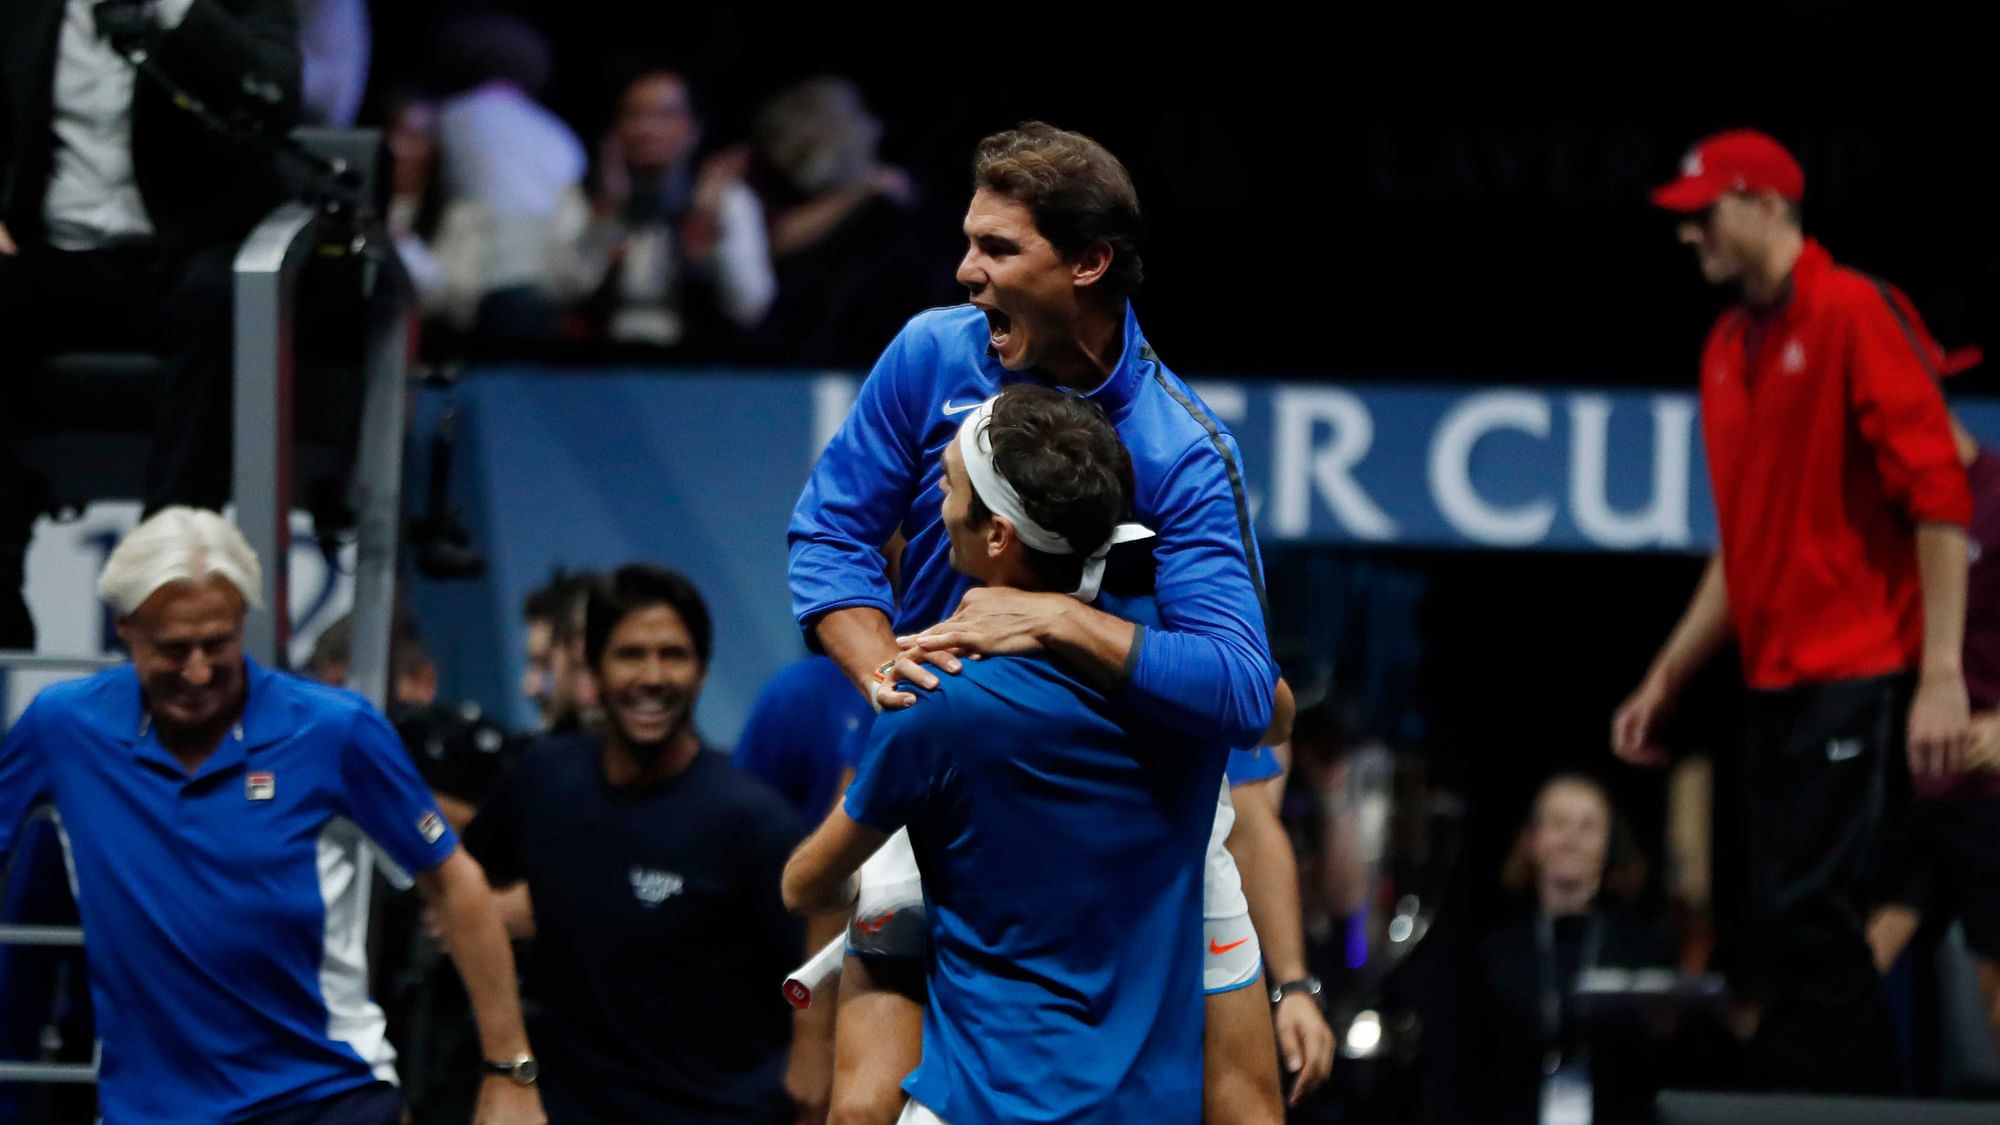 Europe’s Roger Federer celebrates with teammate Rafael Nadal, top center, after defeating World’s Nick Kyrgios during their Laver Cup